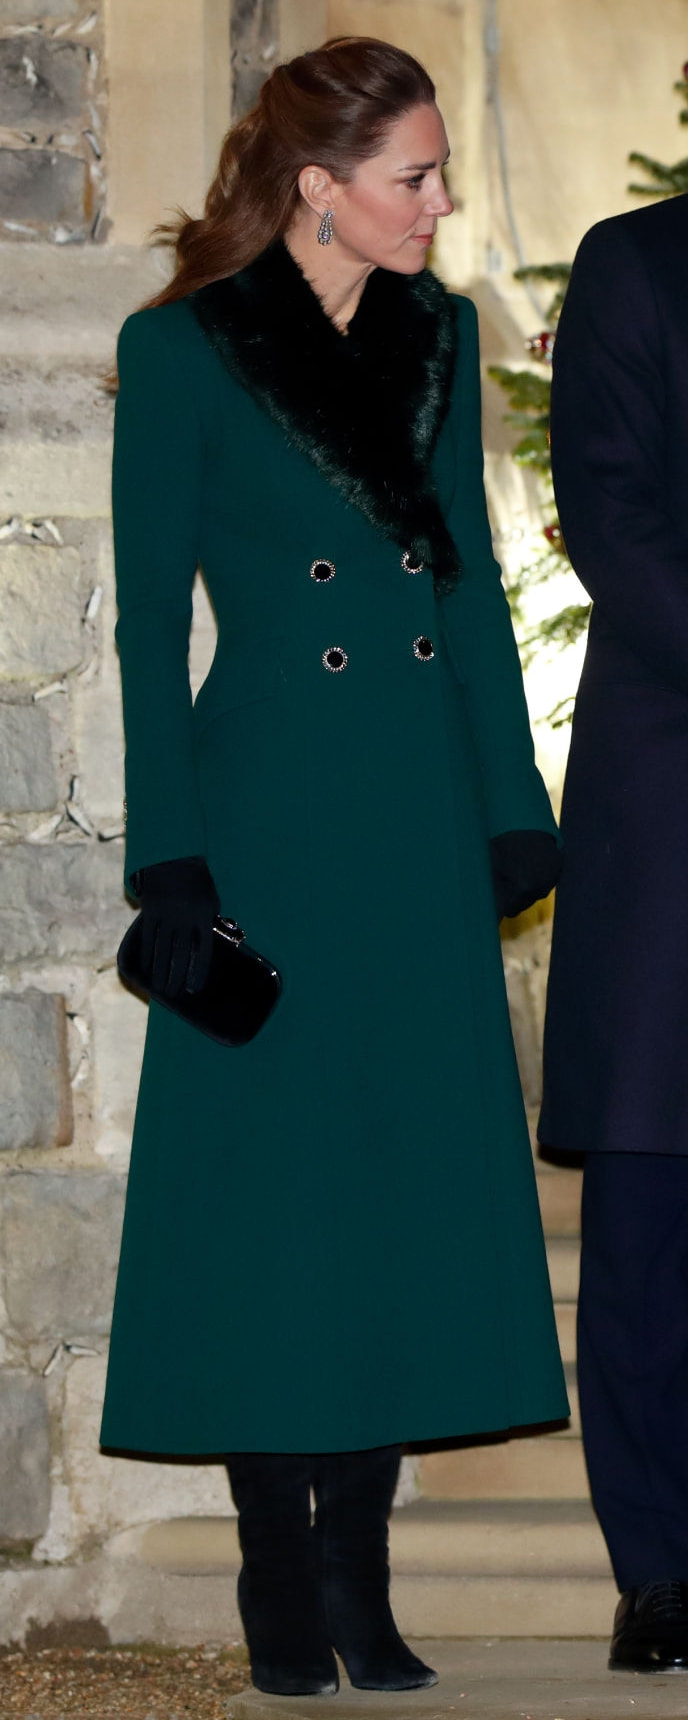 Troy London Forest Green Faux Fur Lapel Collar as seen on Kate Middleton, the Duchess of Cambridge.